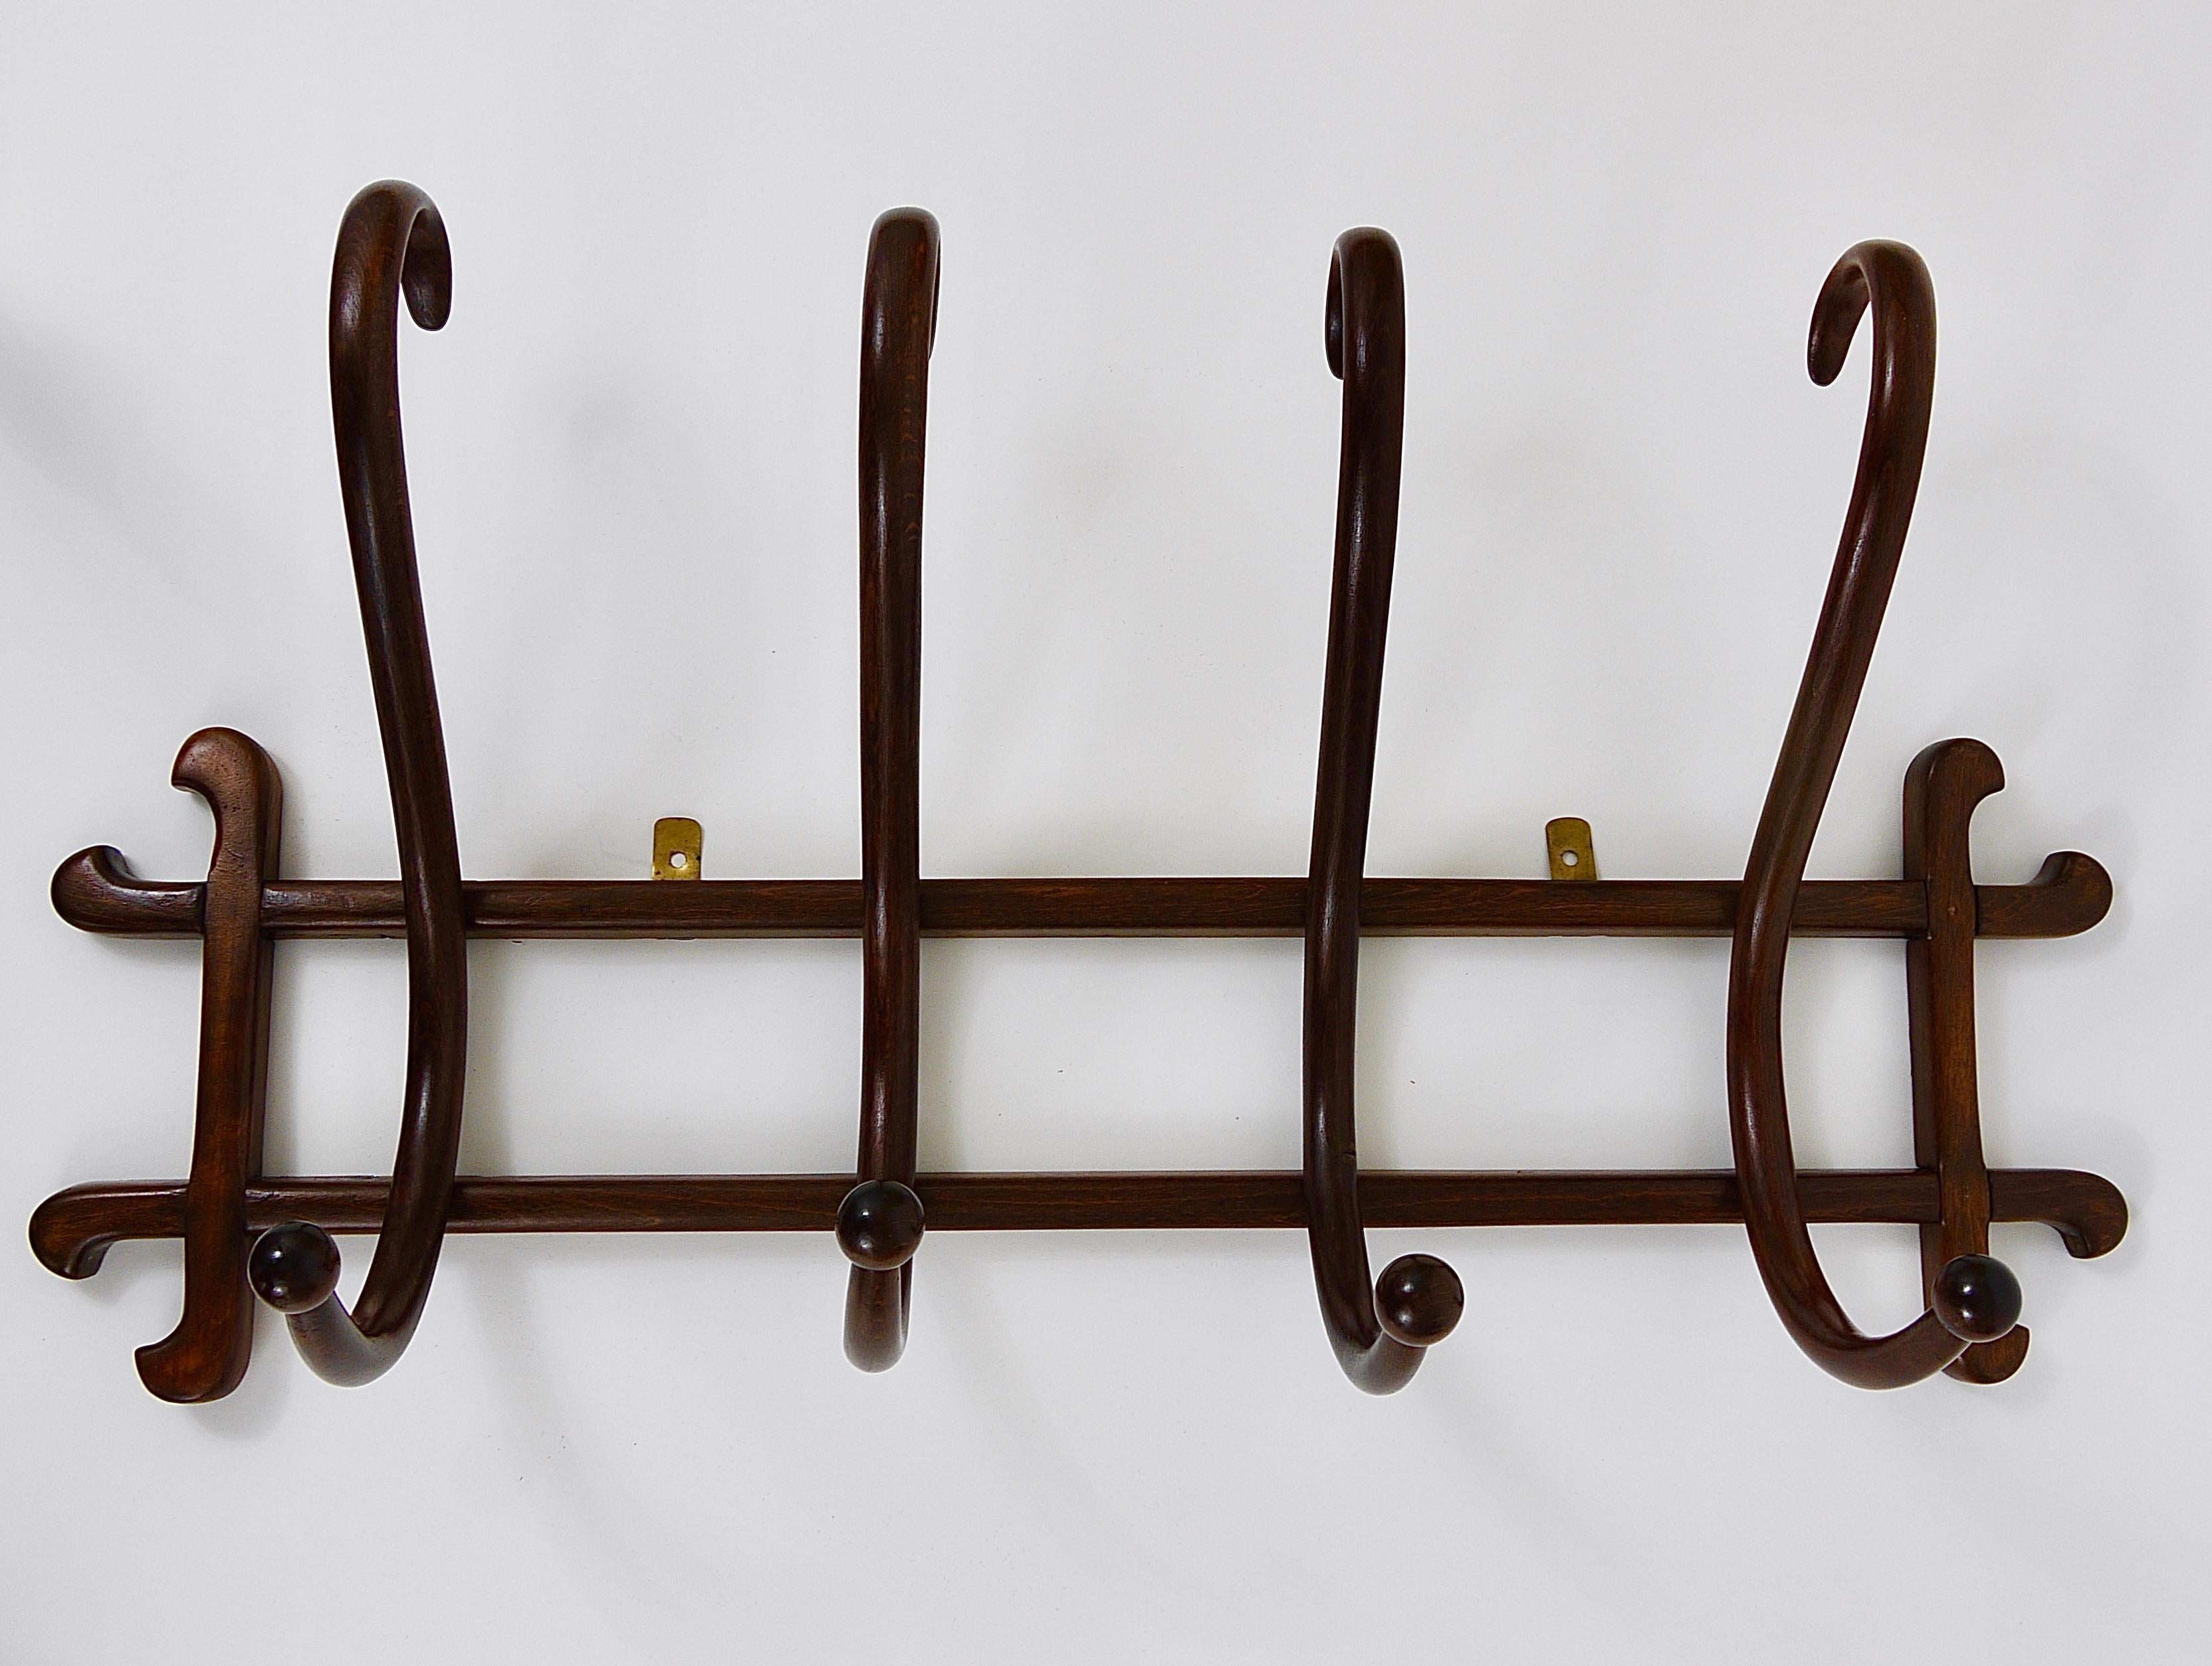 1900s Thonet Art Nouveau Secession Bentwood Wall Coat Rack with four Hangers 5